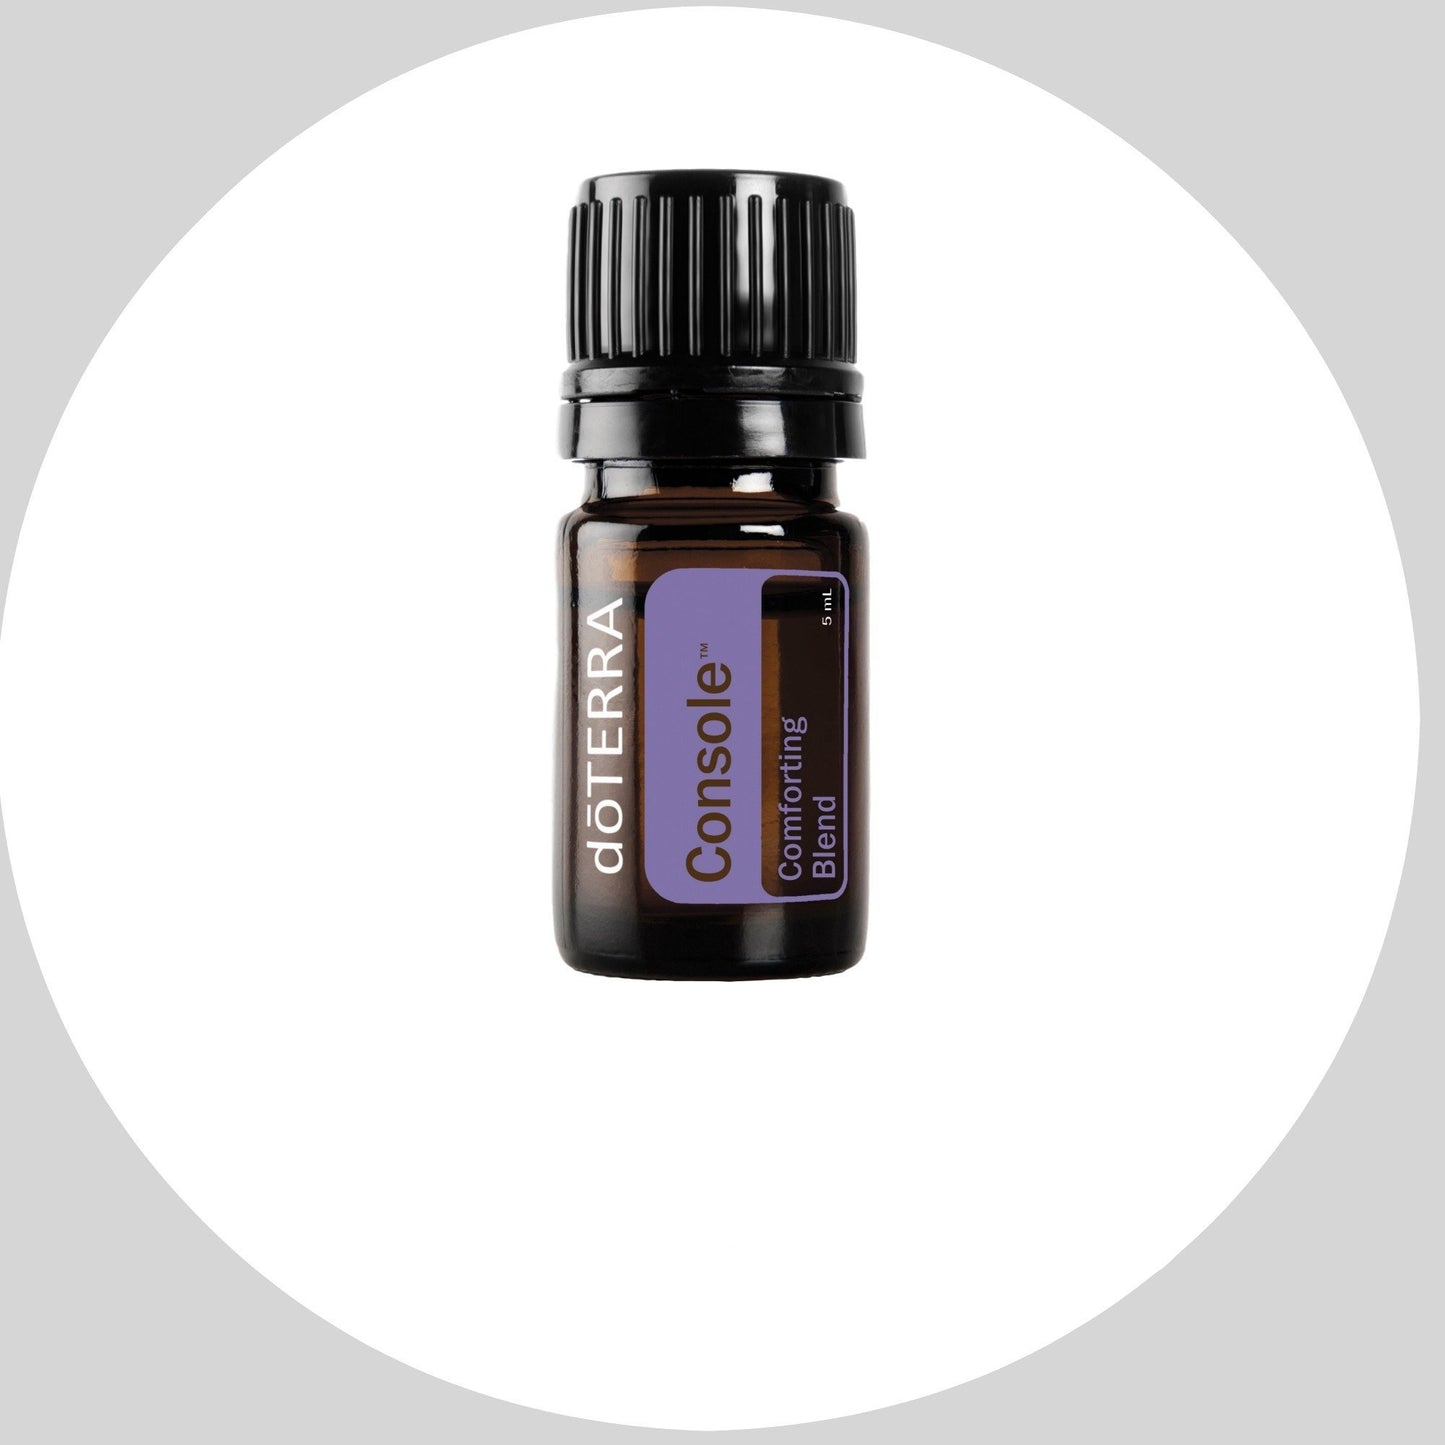 Console (Comforting Blend) 5mL